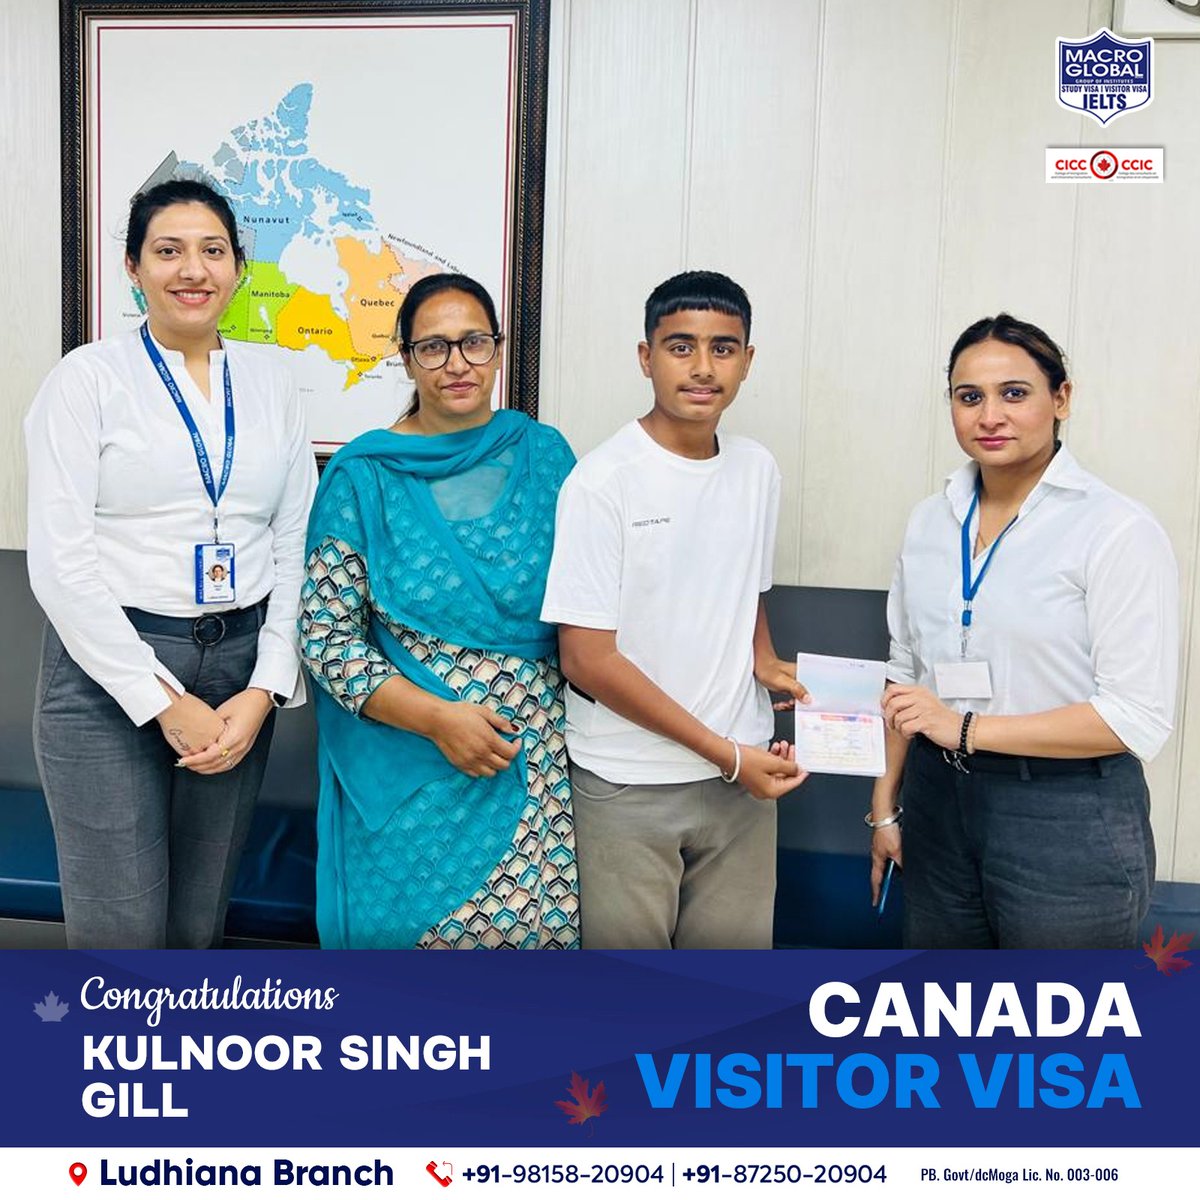 Fast-Tracked with Macro Global! 🇨🇦 Congrats to Kulnoor Singh Gill! His Canada Visitor Visa application was smoothly approved by our expert team. 

#MacroGlobal #GurmilapSinghDalla #Canada #Canadastudyvisa #canadaopenworkpermit #spousevisa #Visitorvisa #Visa #IELTS #Immigration